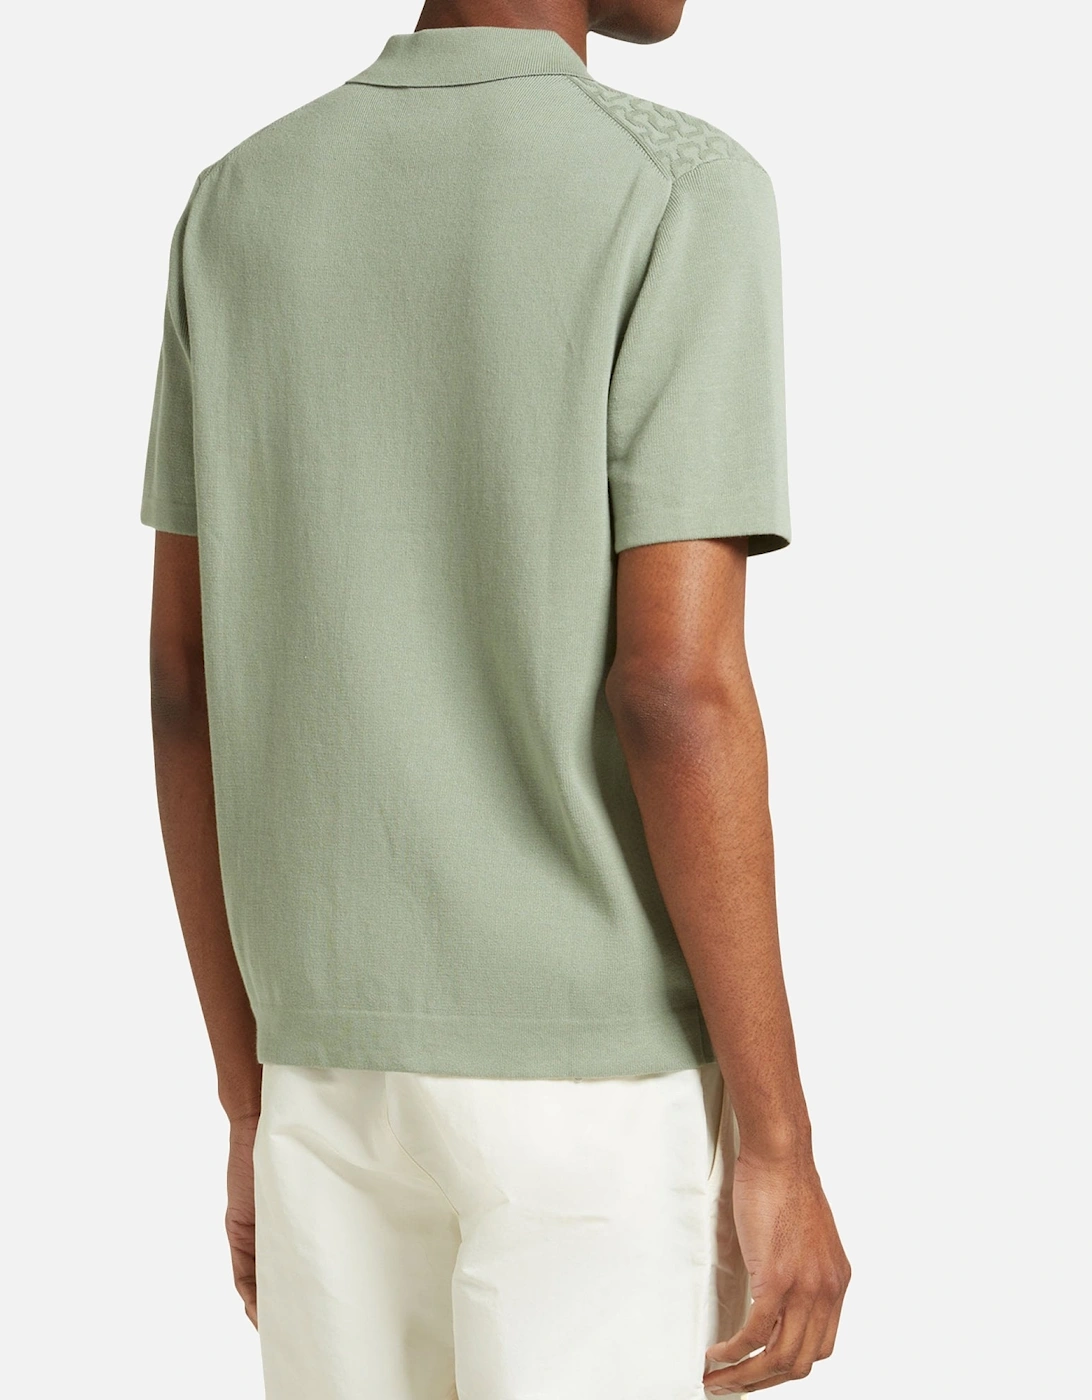 Link Knitted Sage Green Shirt